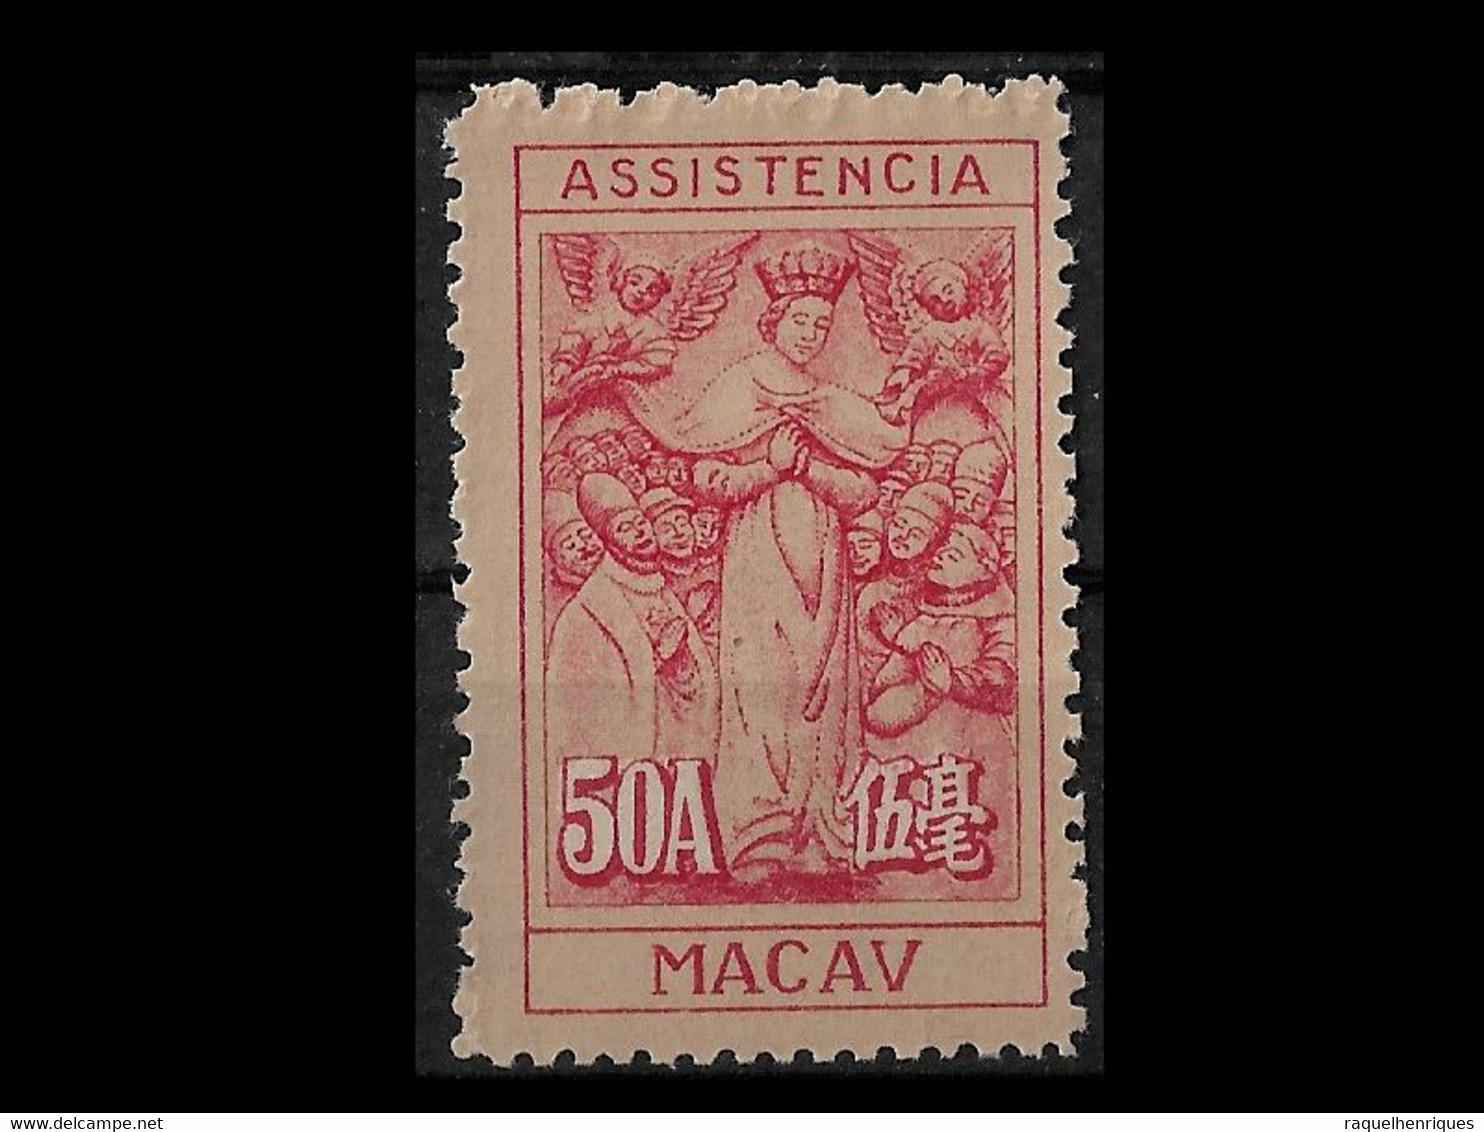 MACAU STAMP - 1953-56 Symbol Of Charity - Inscription "ASSISTENCIA" Perf:10 MNH (BA5#314) - Timbres-taxe